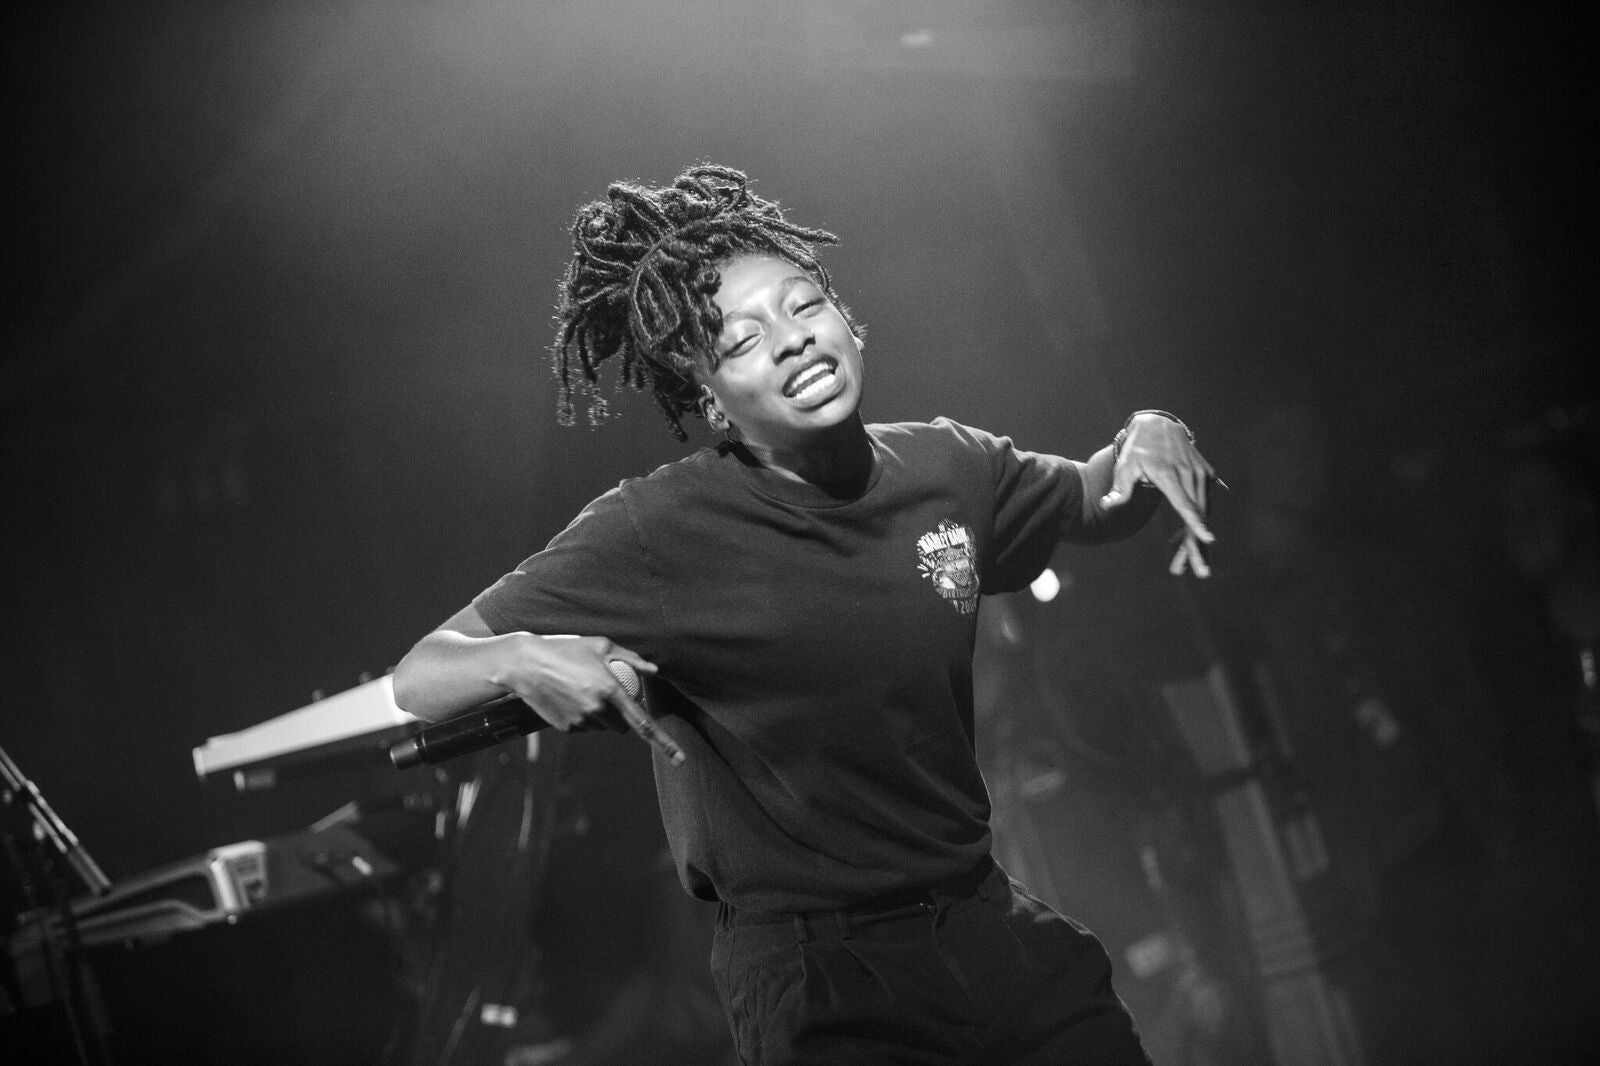 Little Simz performing on the Magic Mirrors stage at Bergenfest in Norway